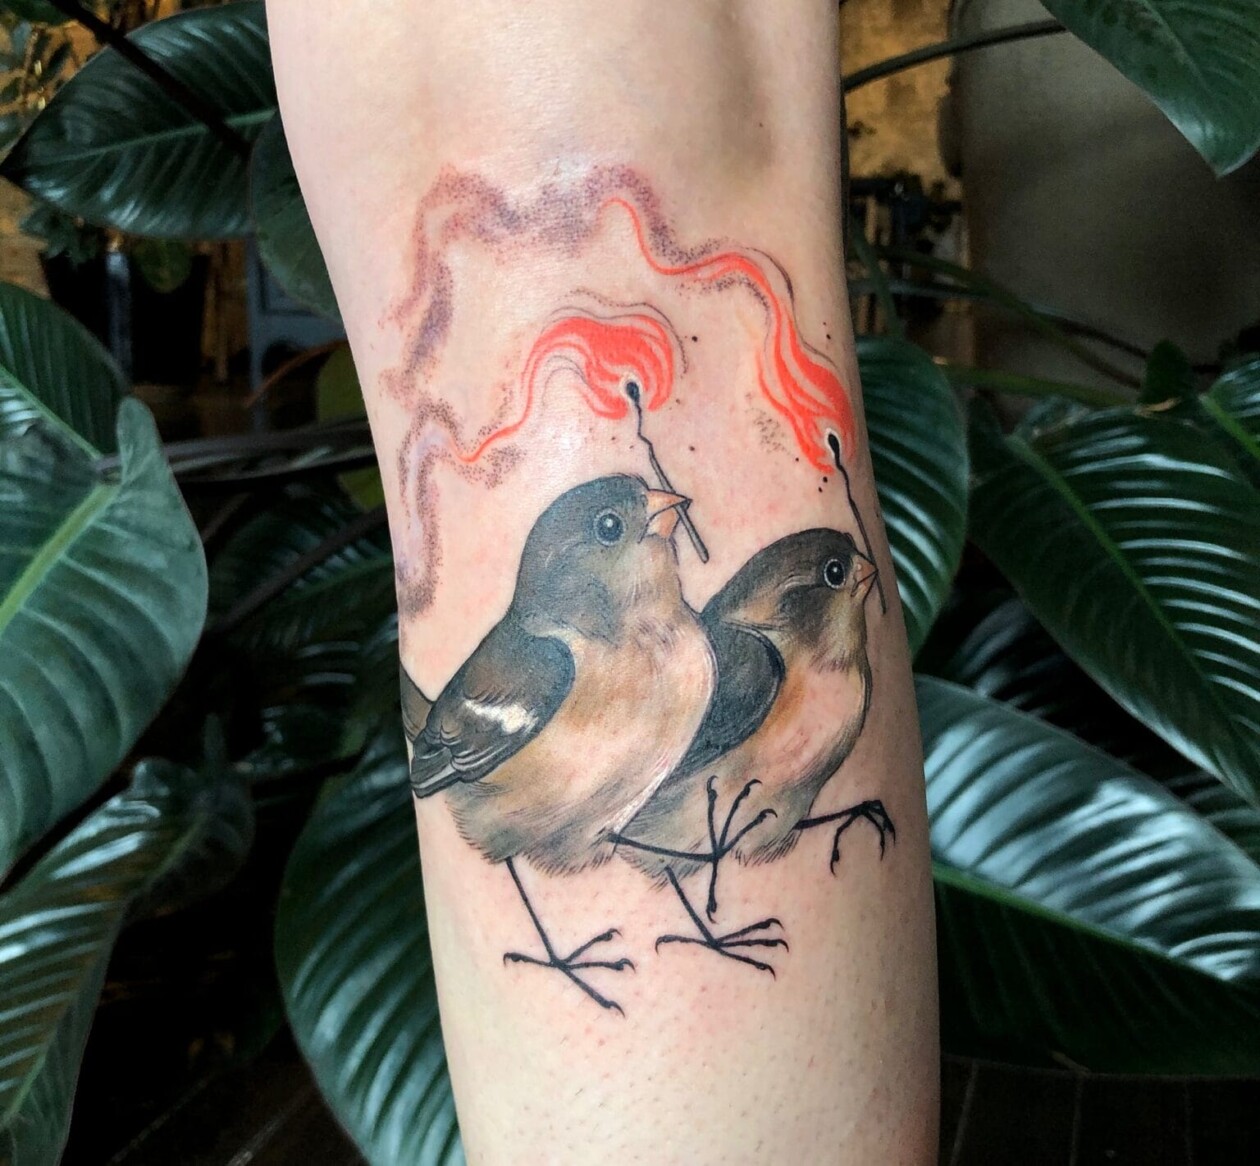 Stephanie Brown Creates Whimsical Tattoos Of Birds Holding A Lit Match Symbolizing Hope For A Better Future (2)